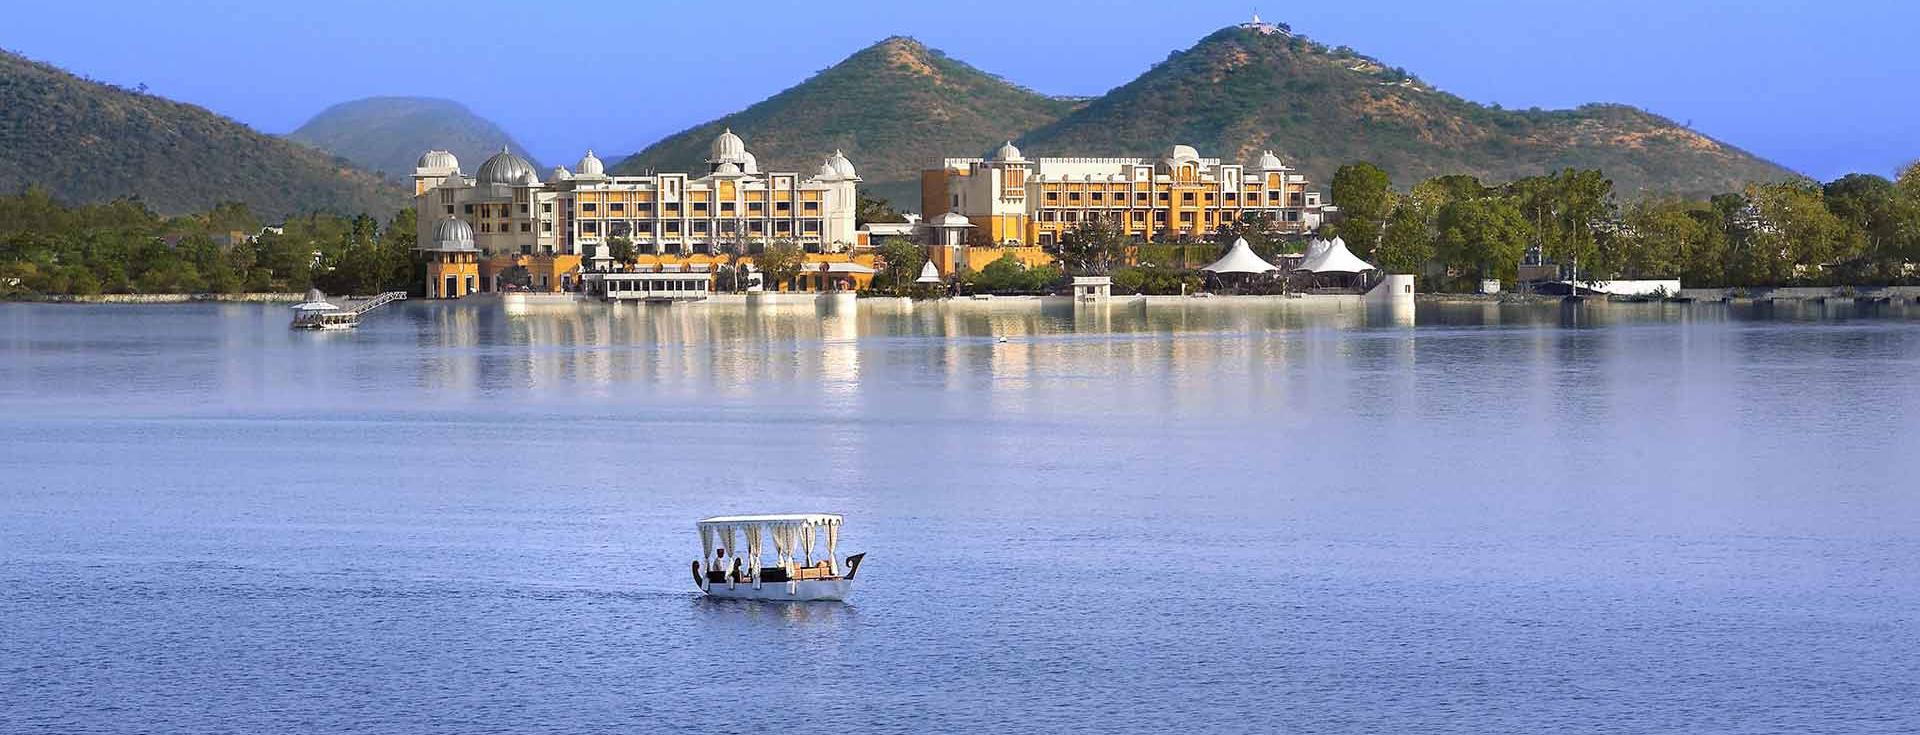 The Leela Palaces Hotels and Resorts appoints Nishant Agarwal as General Manager of The Leela Palace Udaipur